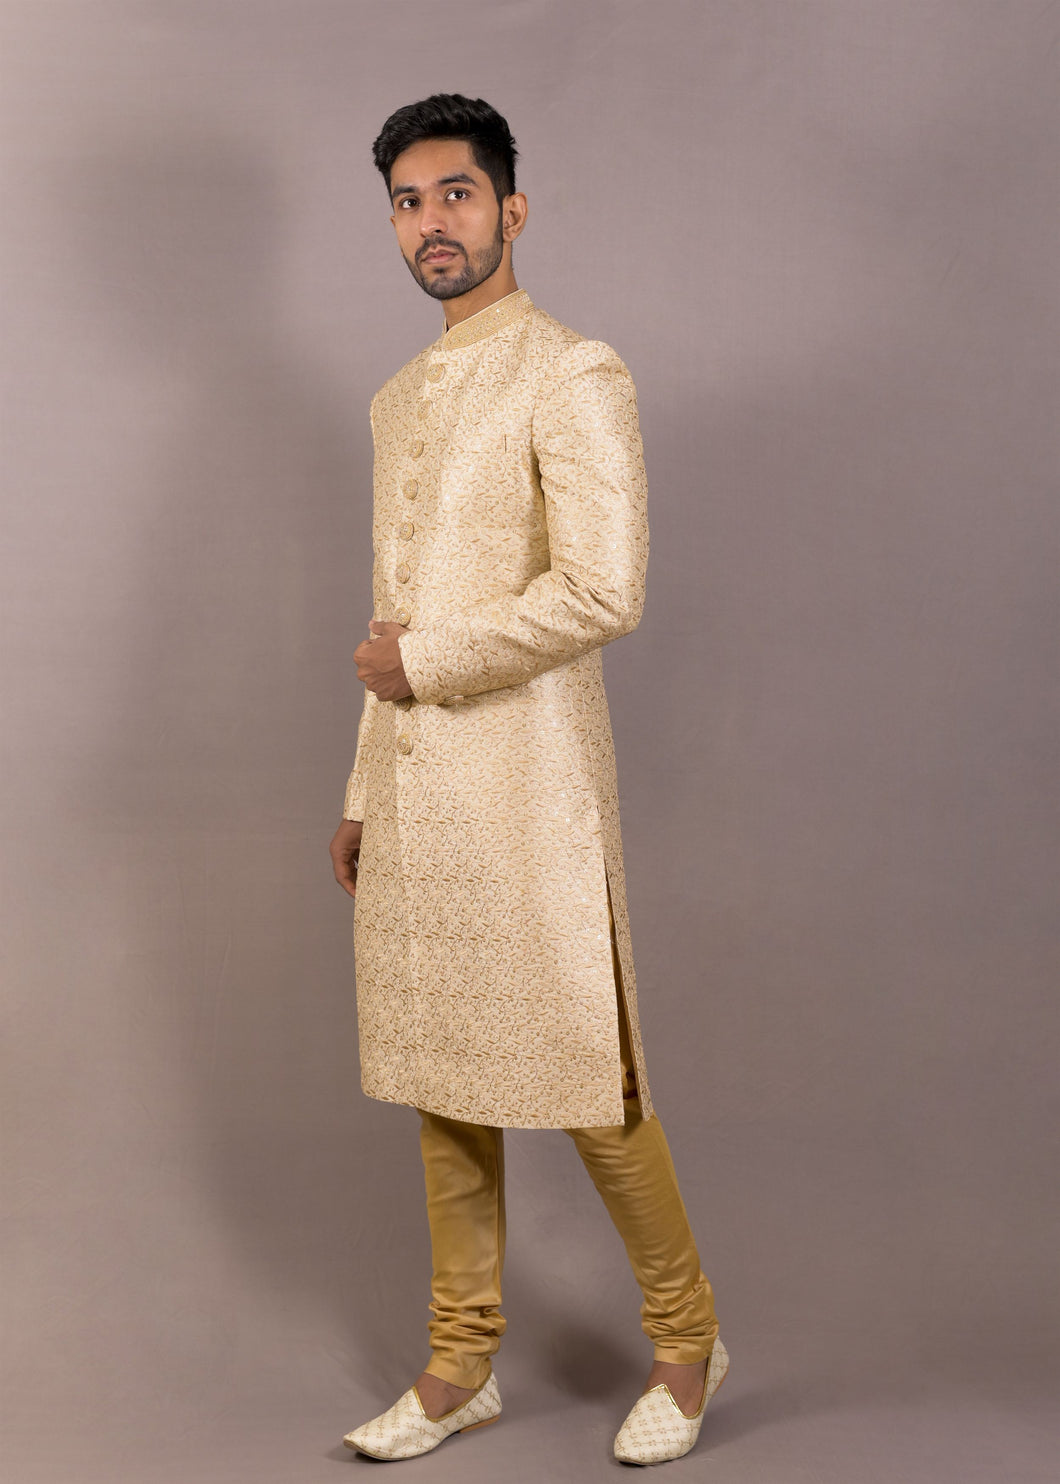 FLORAL EMBROIDERED SHERWANI